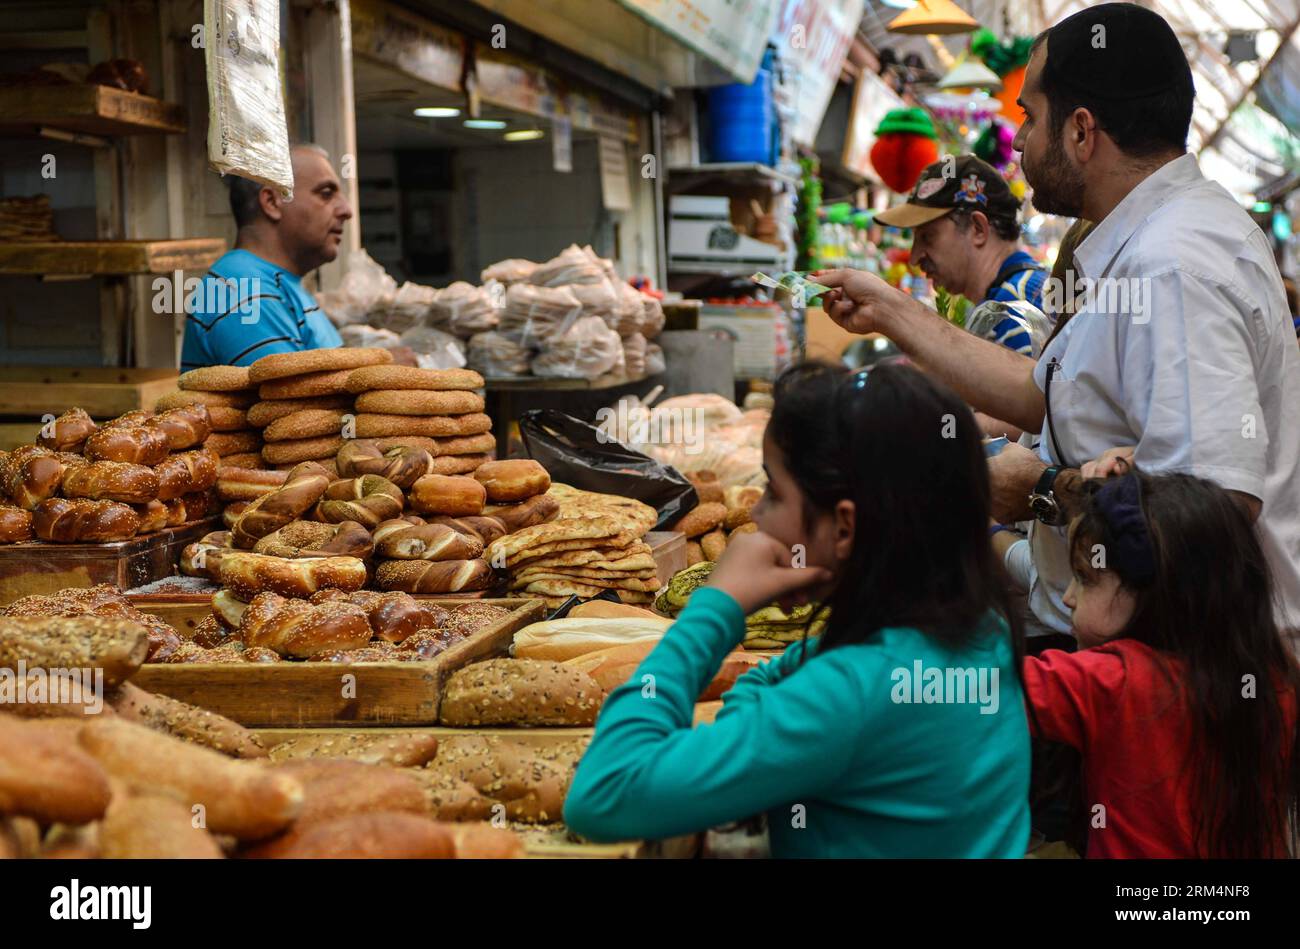 Bildnummer: 60492887  Datum: 17.09.2013  Copyright: imago/Xinhua (130918) -- JERUSALEM, Sept. 17, 2013 (Xinhua) -- A man buys bread for the preparations of Sukkot holiday at a market in Jerusalem, on Sept. 17, 2013. The Sukkot , Feast of Tabernacles, is a biblical weeklong holiday that recollects the 40 years of travel in the desert after the Exodus from slavery in Egypt. here made preparations on Tuesday for the upcoming Sukkot during which most shops will be closed. (Xinhua/Li Rui) MIDEAST-JERUSALEM-RELIGION-JUDAISM-SUKKOT-PREPARATION PUBLICATIONxNOTxINxCHN Gesellschaft x2x xkg 2013 quer o0 Stock Photo